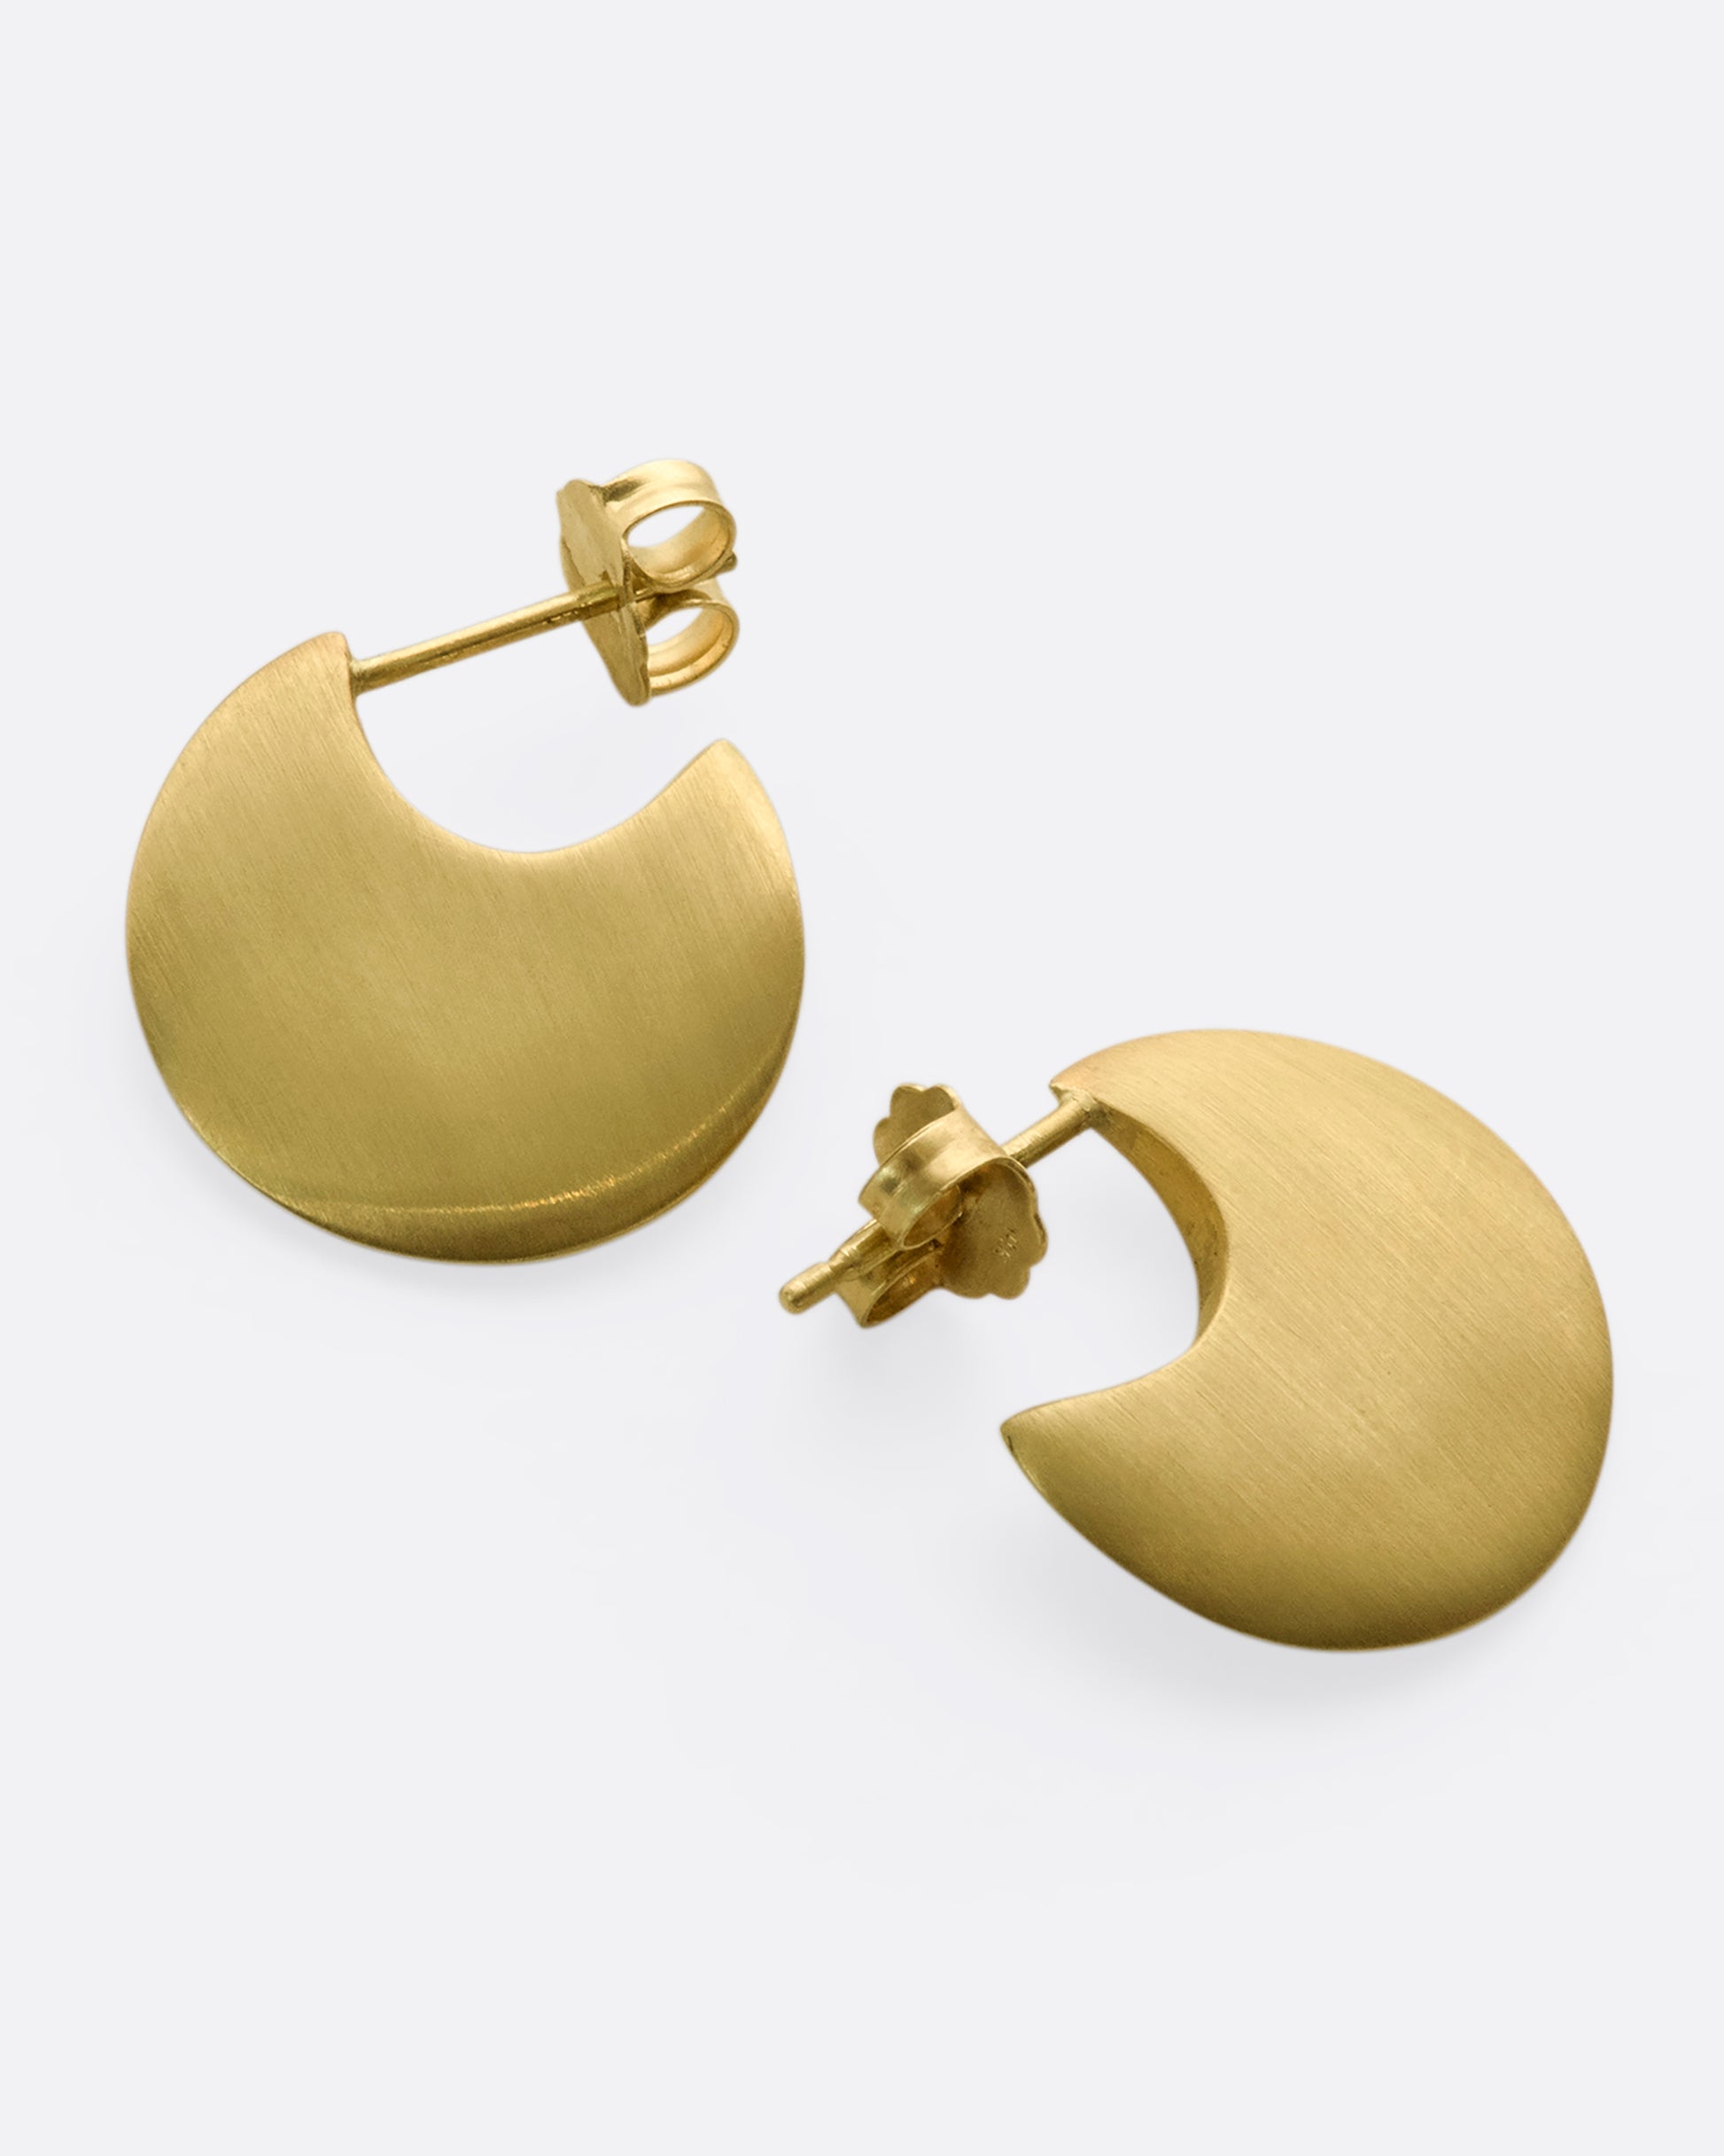 From the front, this pair of 10K solid gold hoop earrings look razor thin.